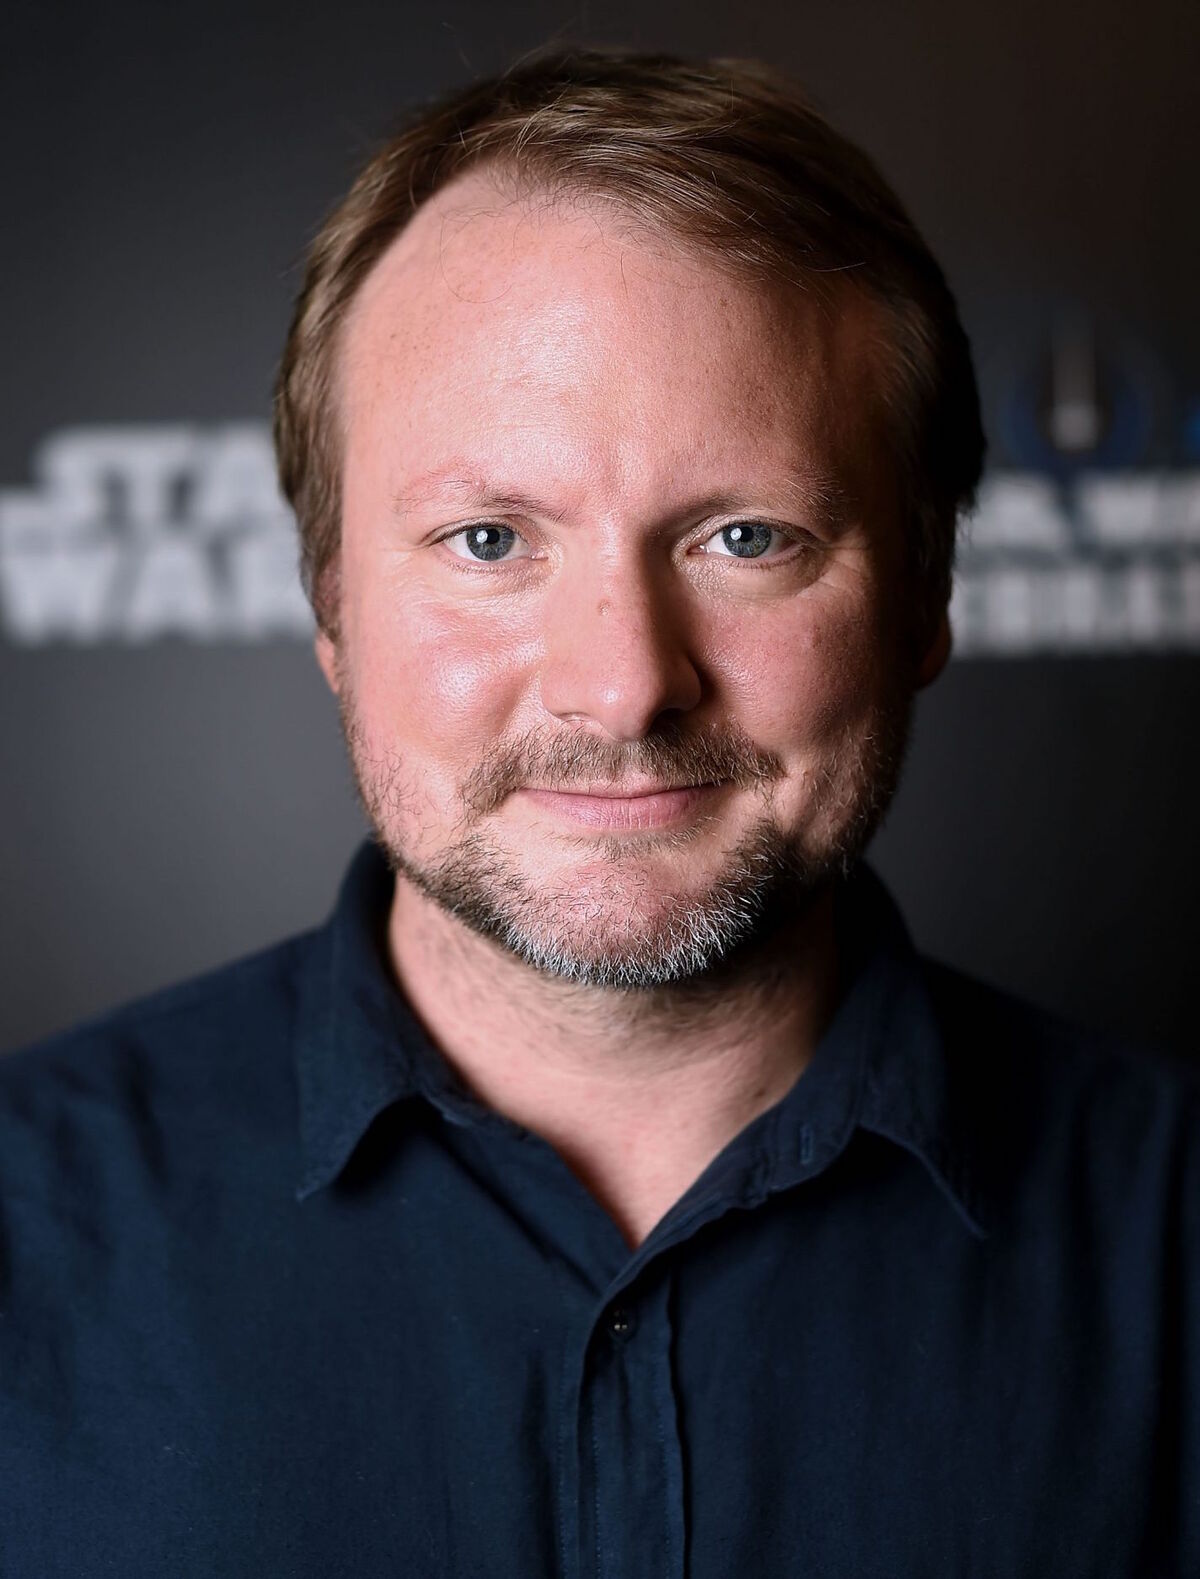 Rian Johnson's Star Wars Trilogy Is 'Not Actively' in Development - IGN